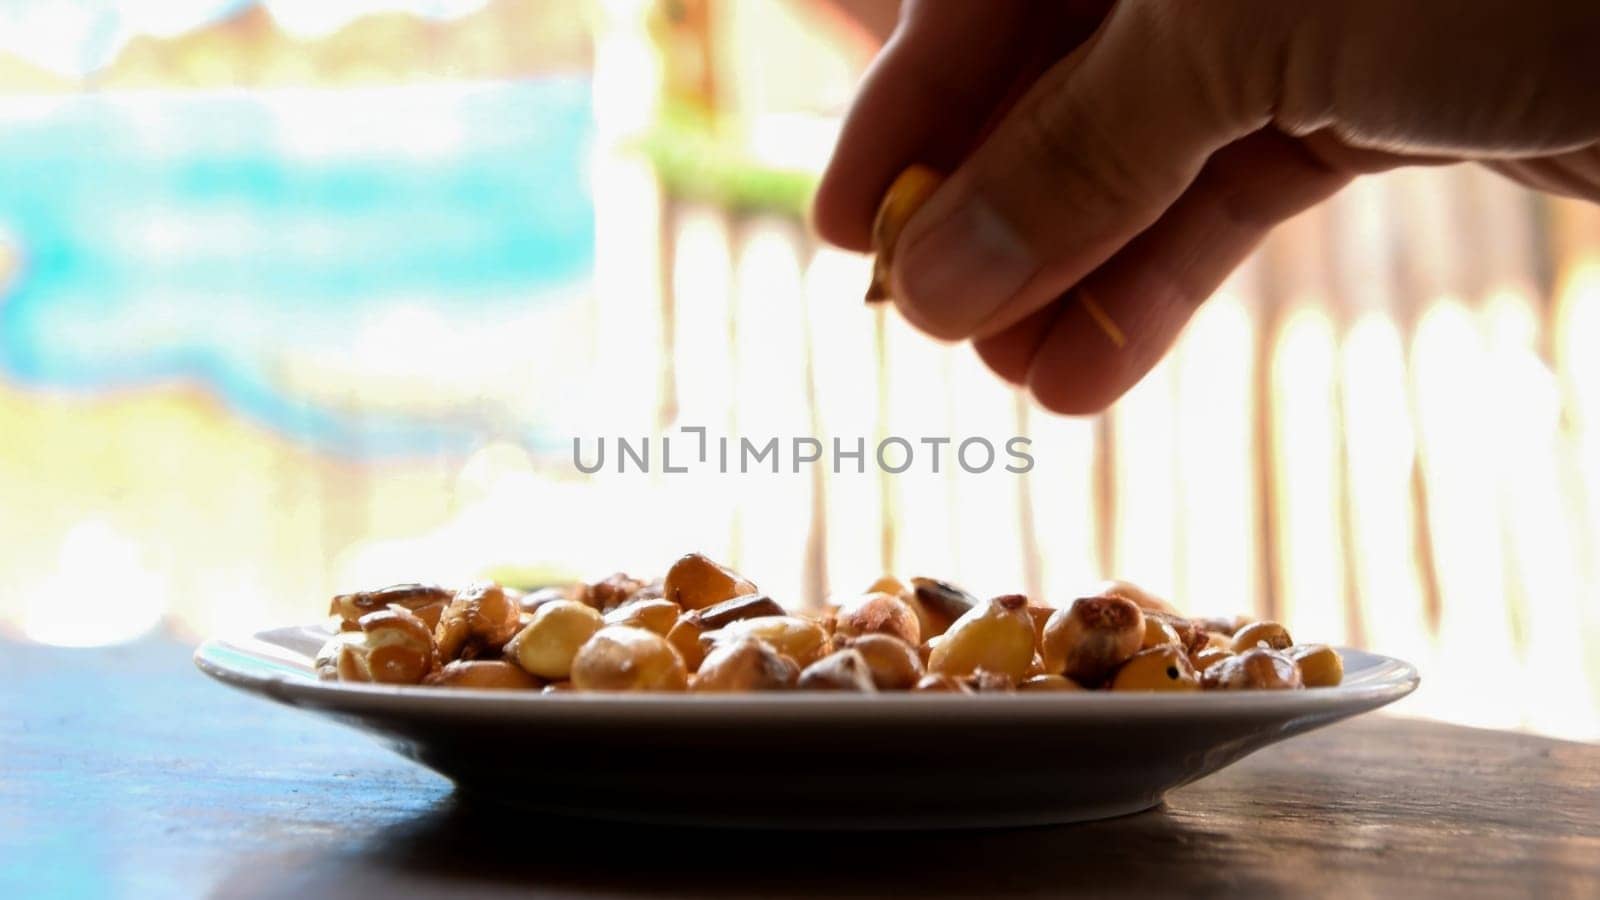 Close-up shot of a hand selecting hazelnuts from a white plate, with a warm, blurry backdrop